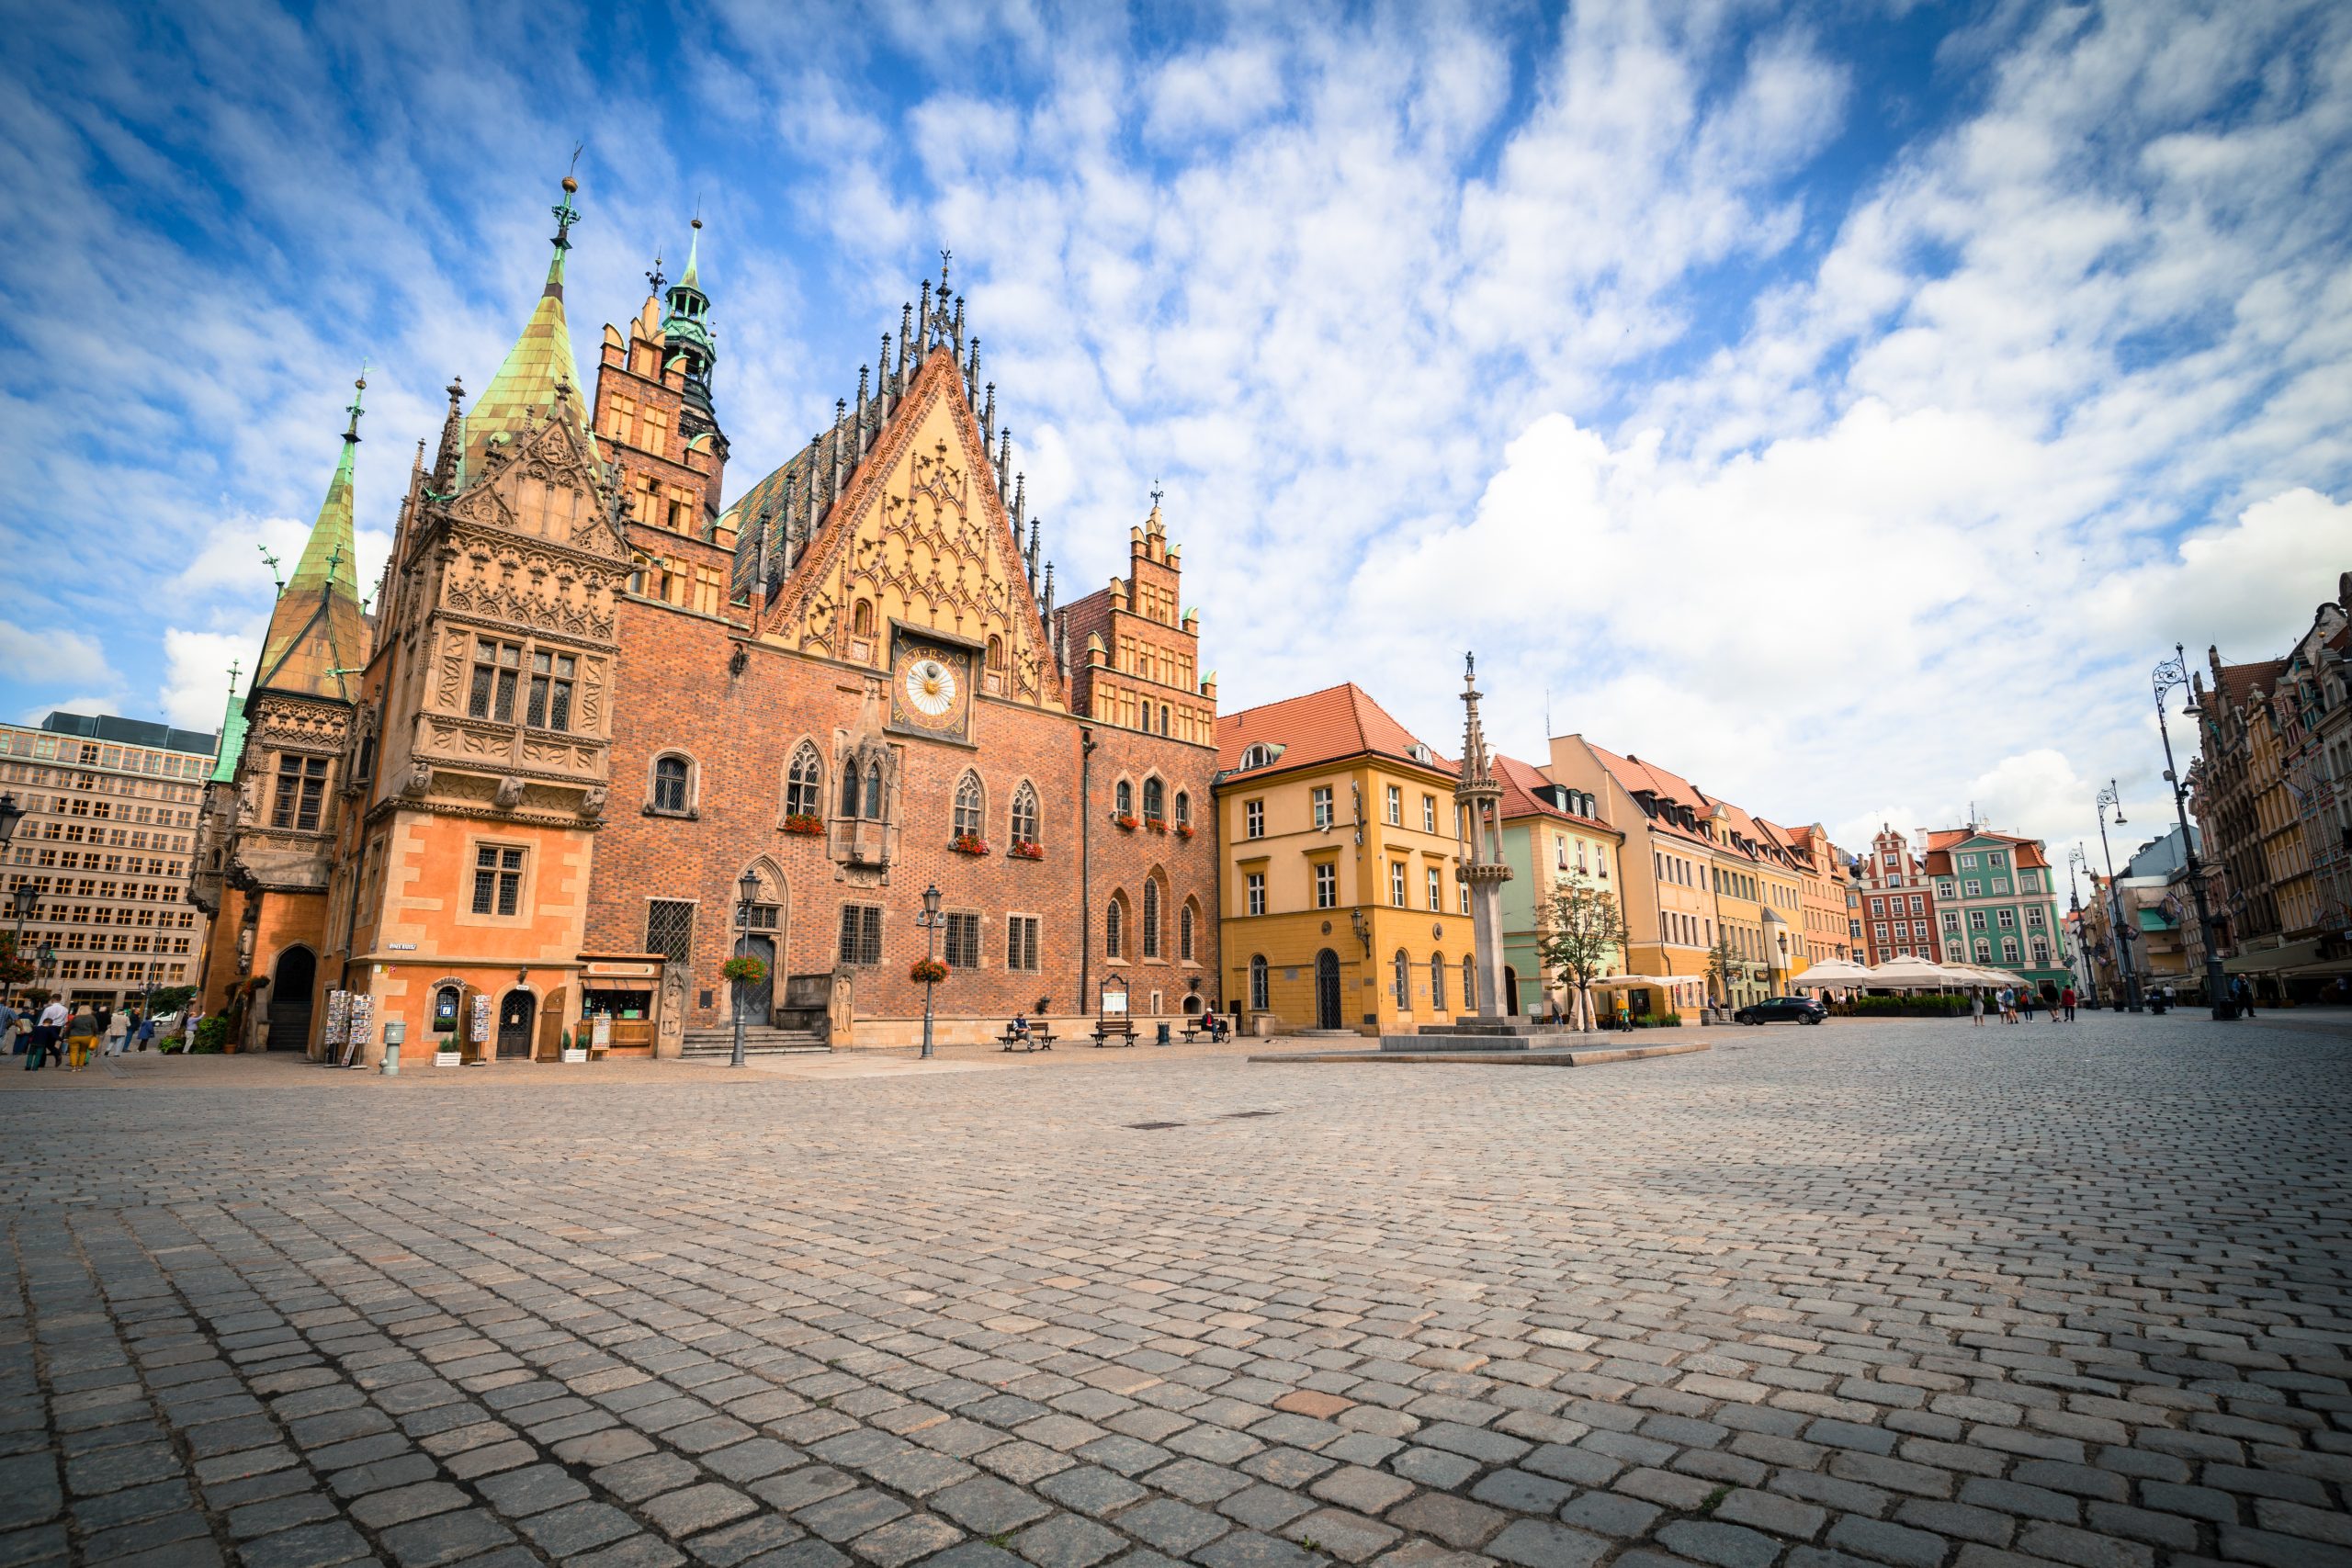 View of the historical marketplace in Wroclaw / Poland.